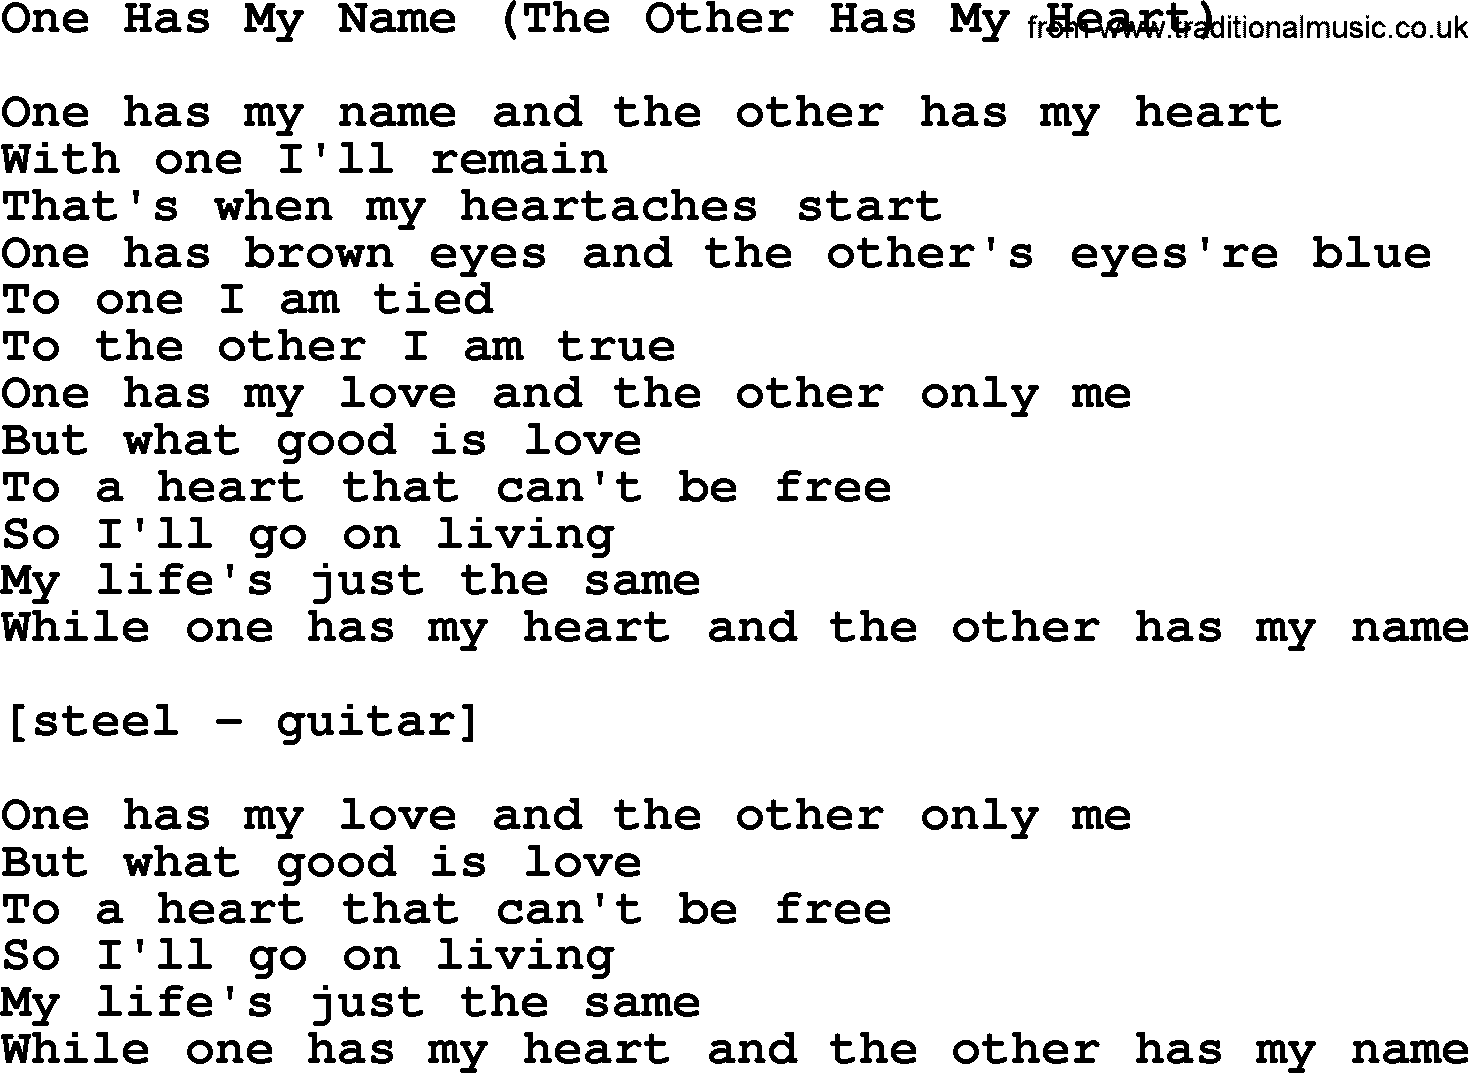 Willie Nelson song: One Has My Name (The Other Has My Heart) lyrics